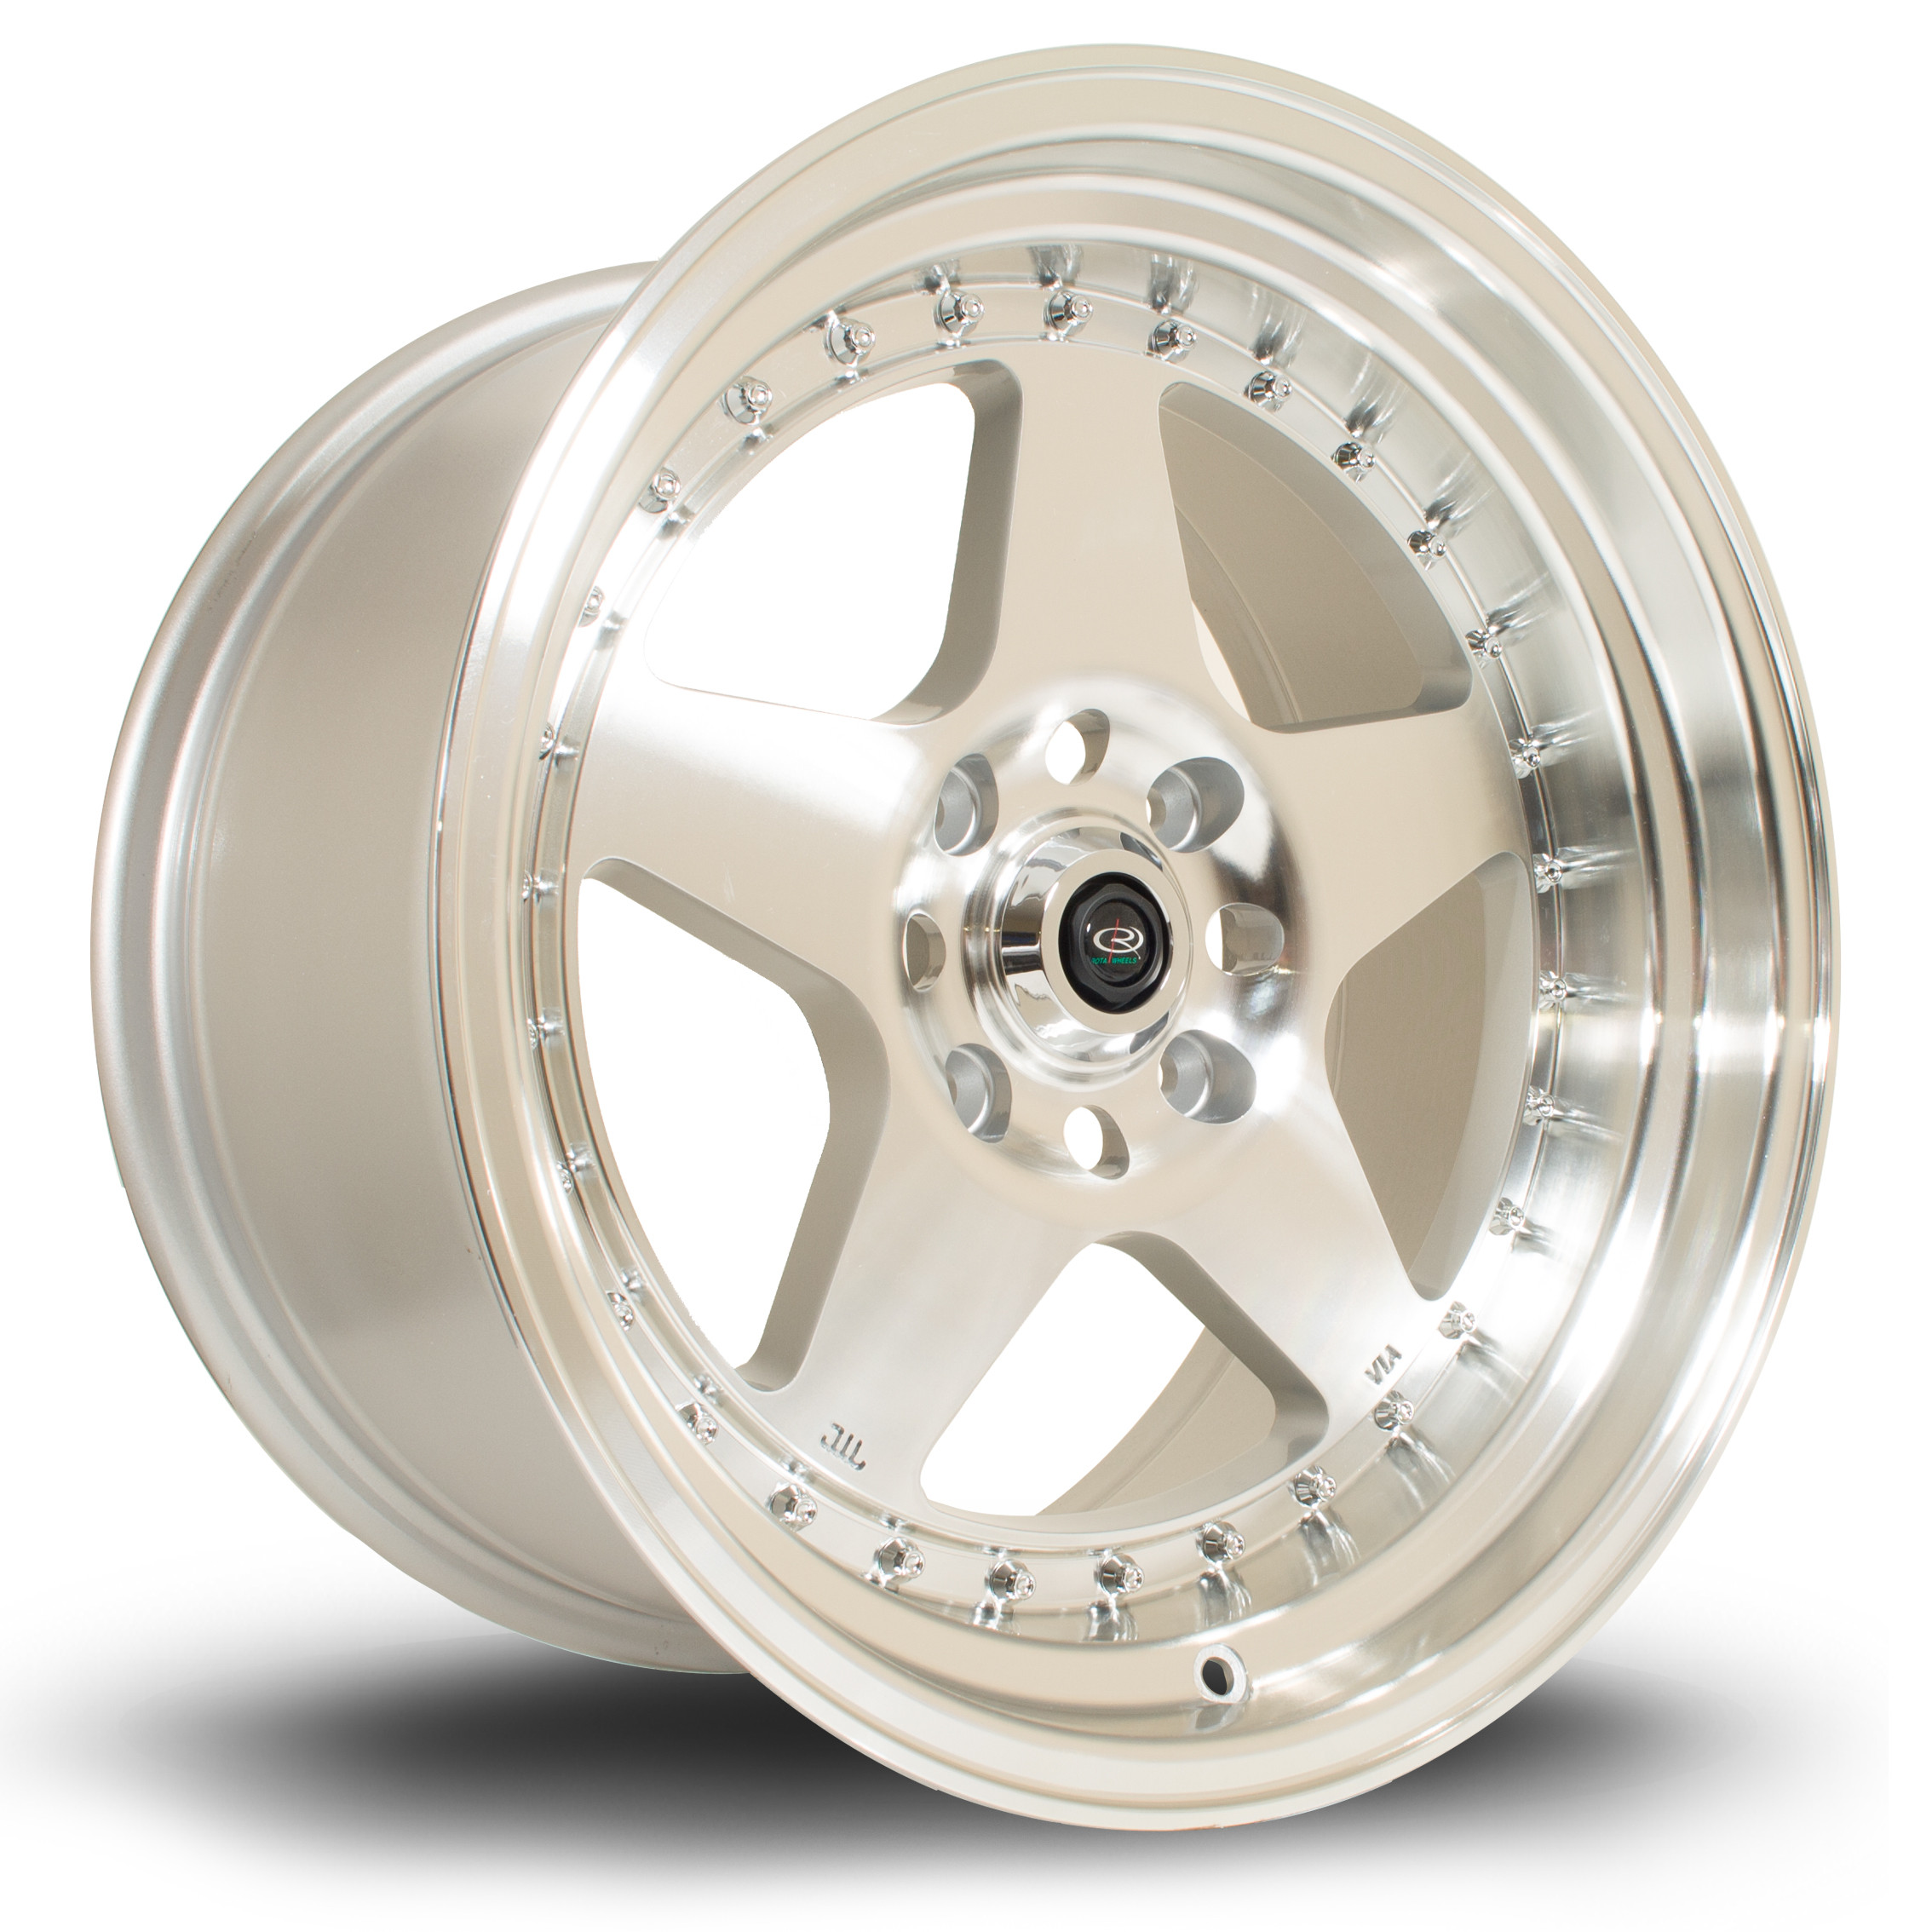 Kyusha 17x9 5x114 ET12 Silver with Polished Face